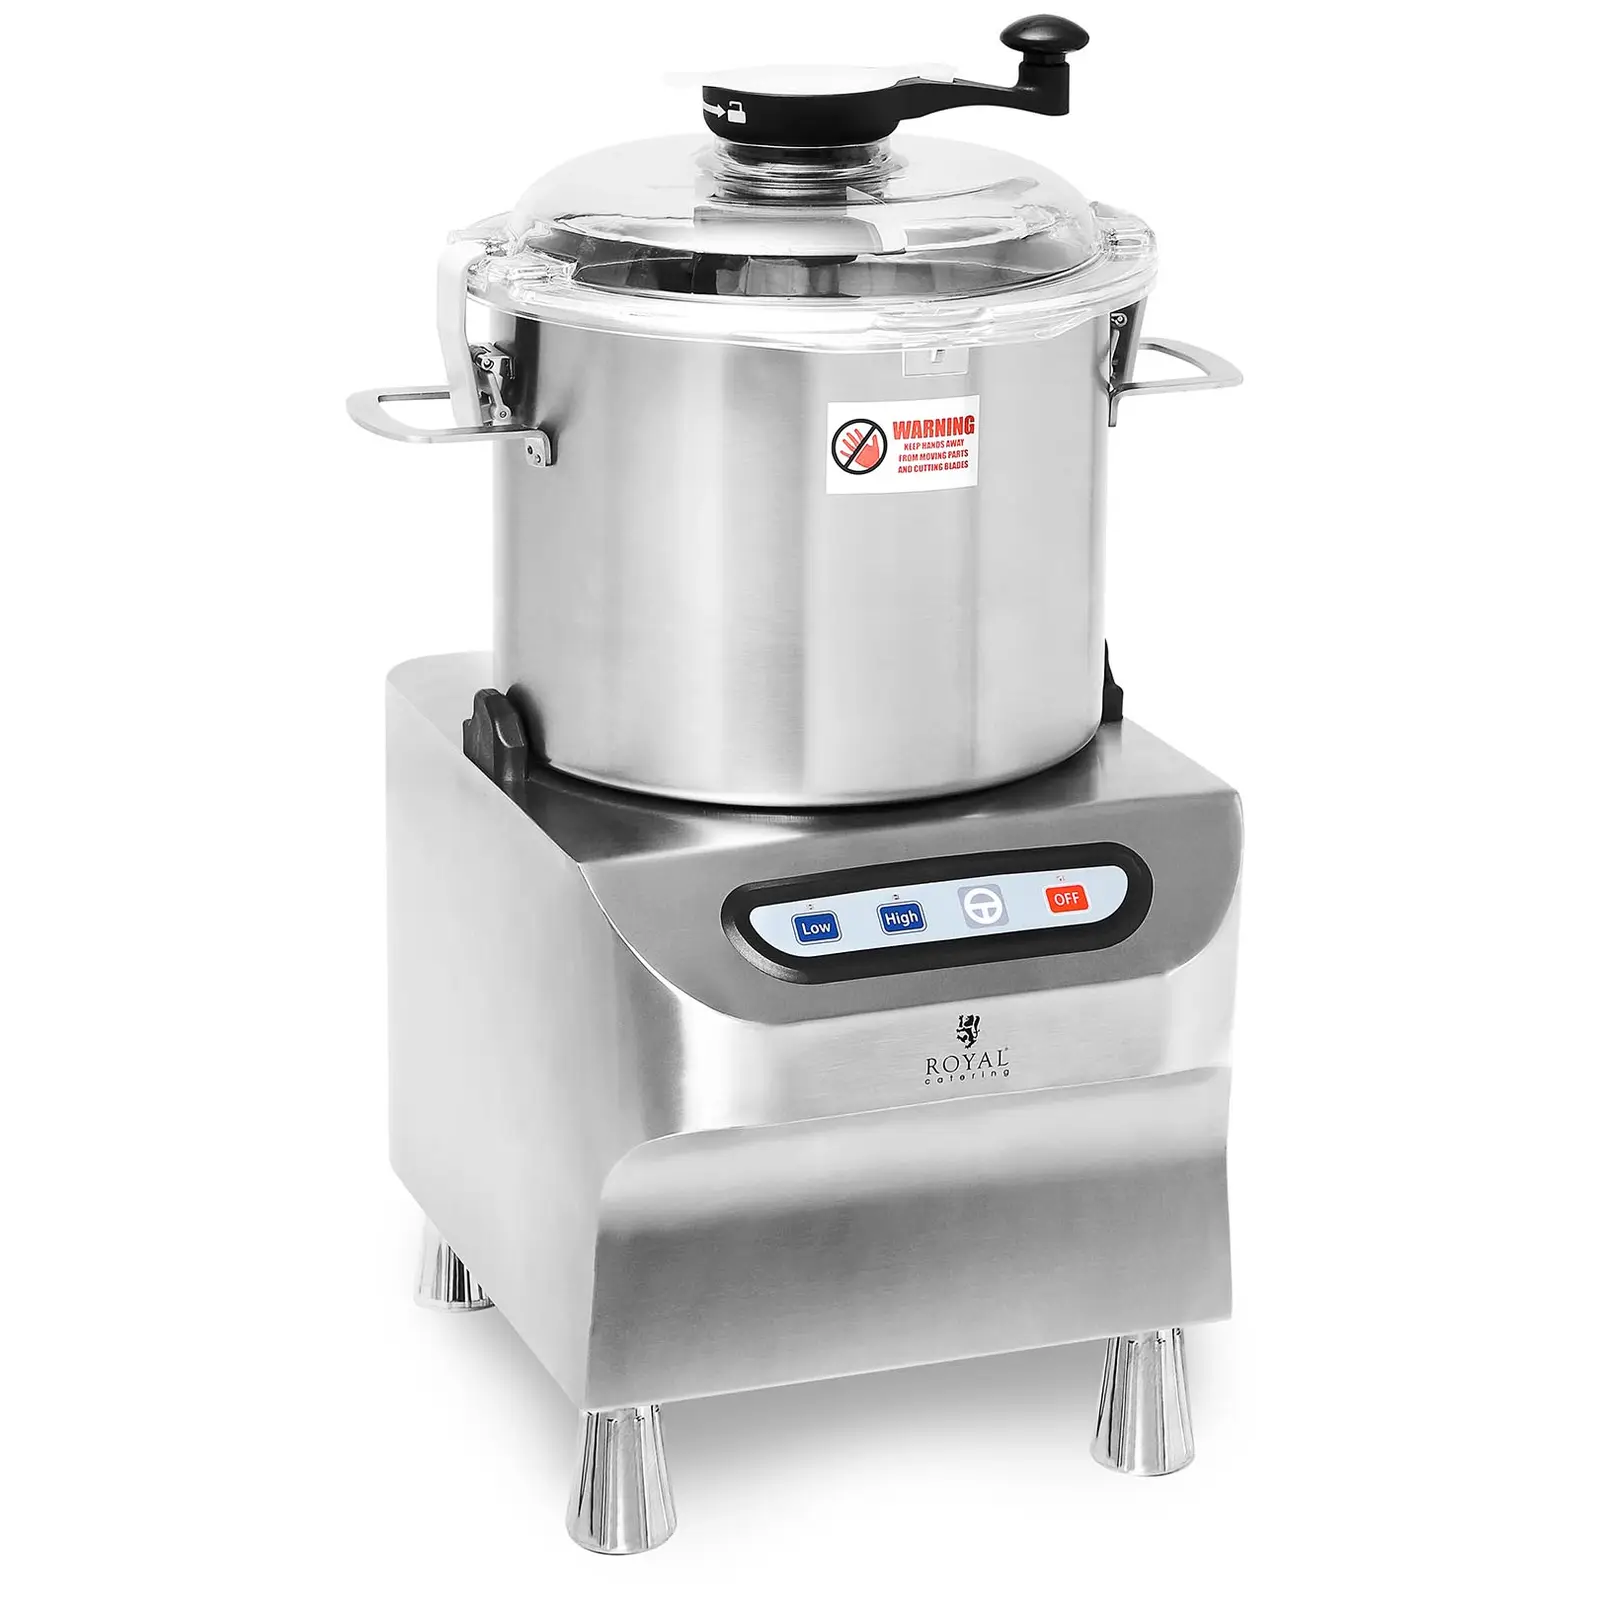 Bowl Cutter - 1500/2200 rpm - Royal Catering - 12 L